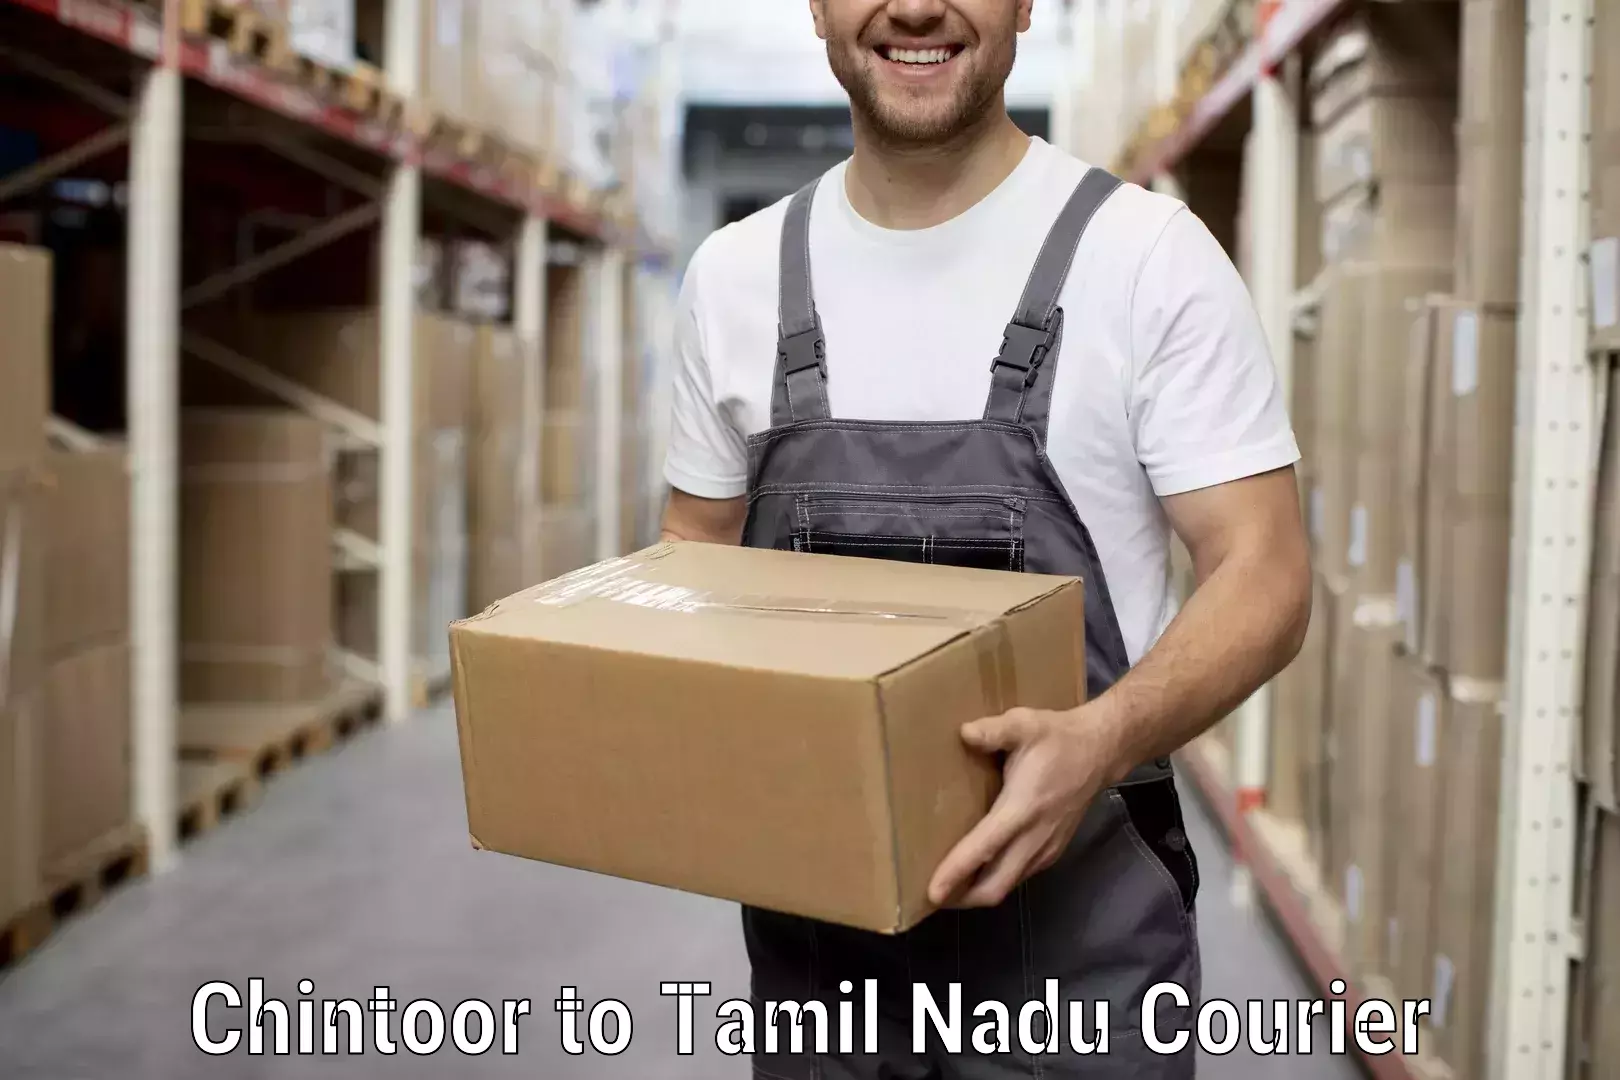 Trusted household movers Chintoor to Tenkasi